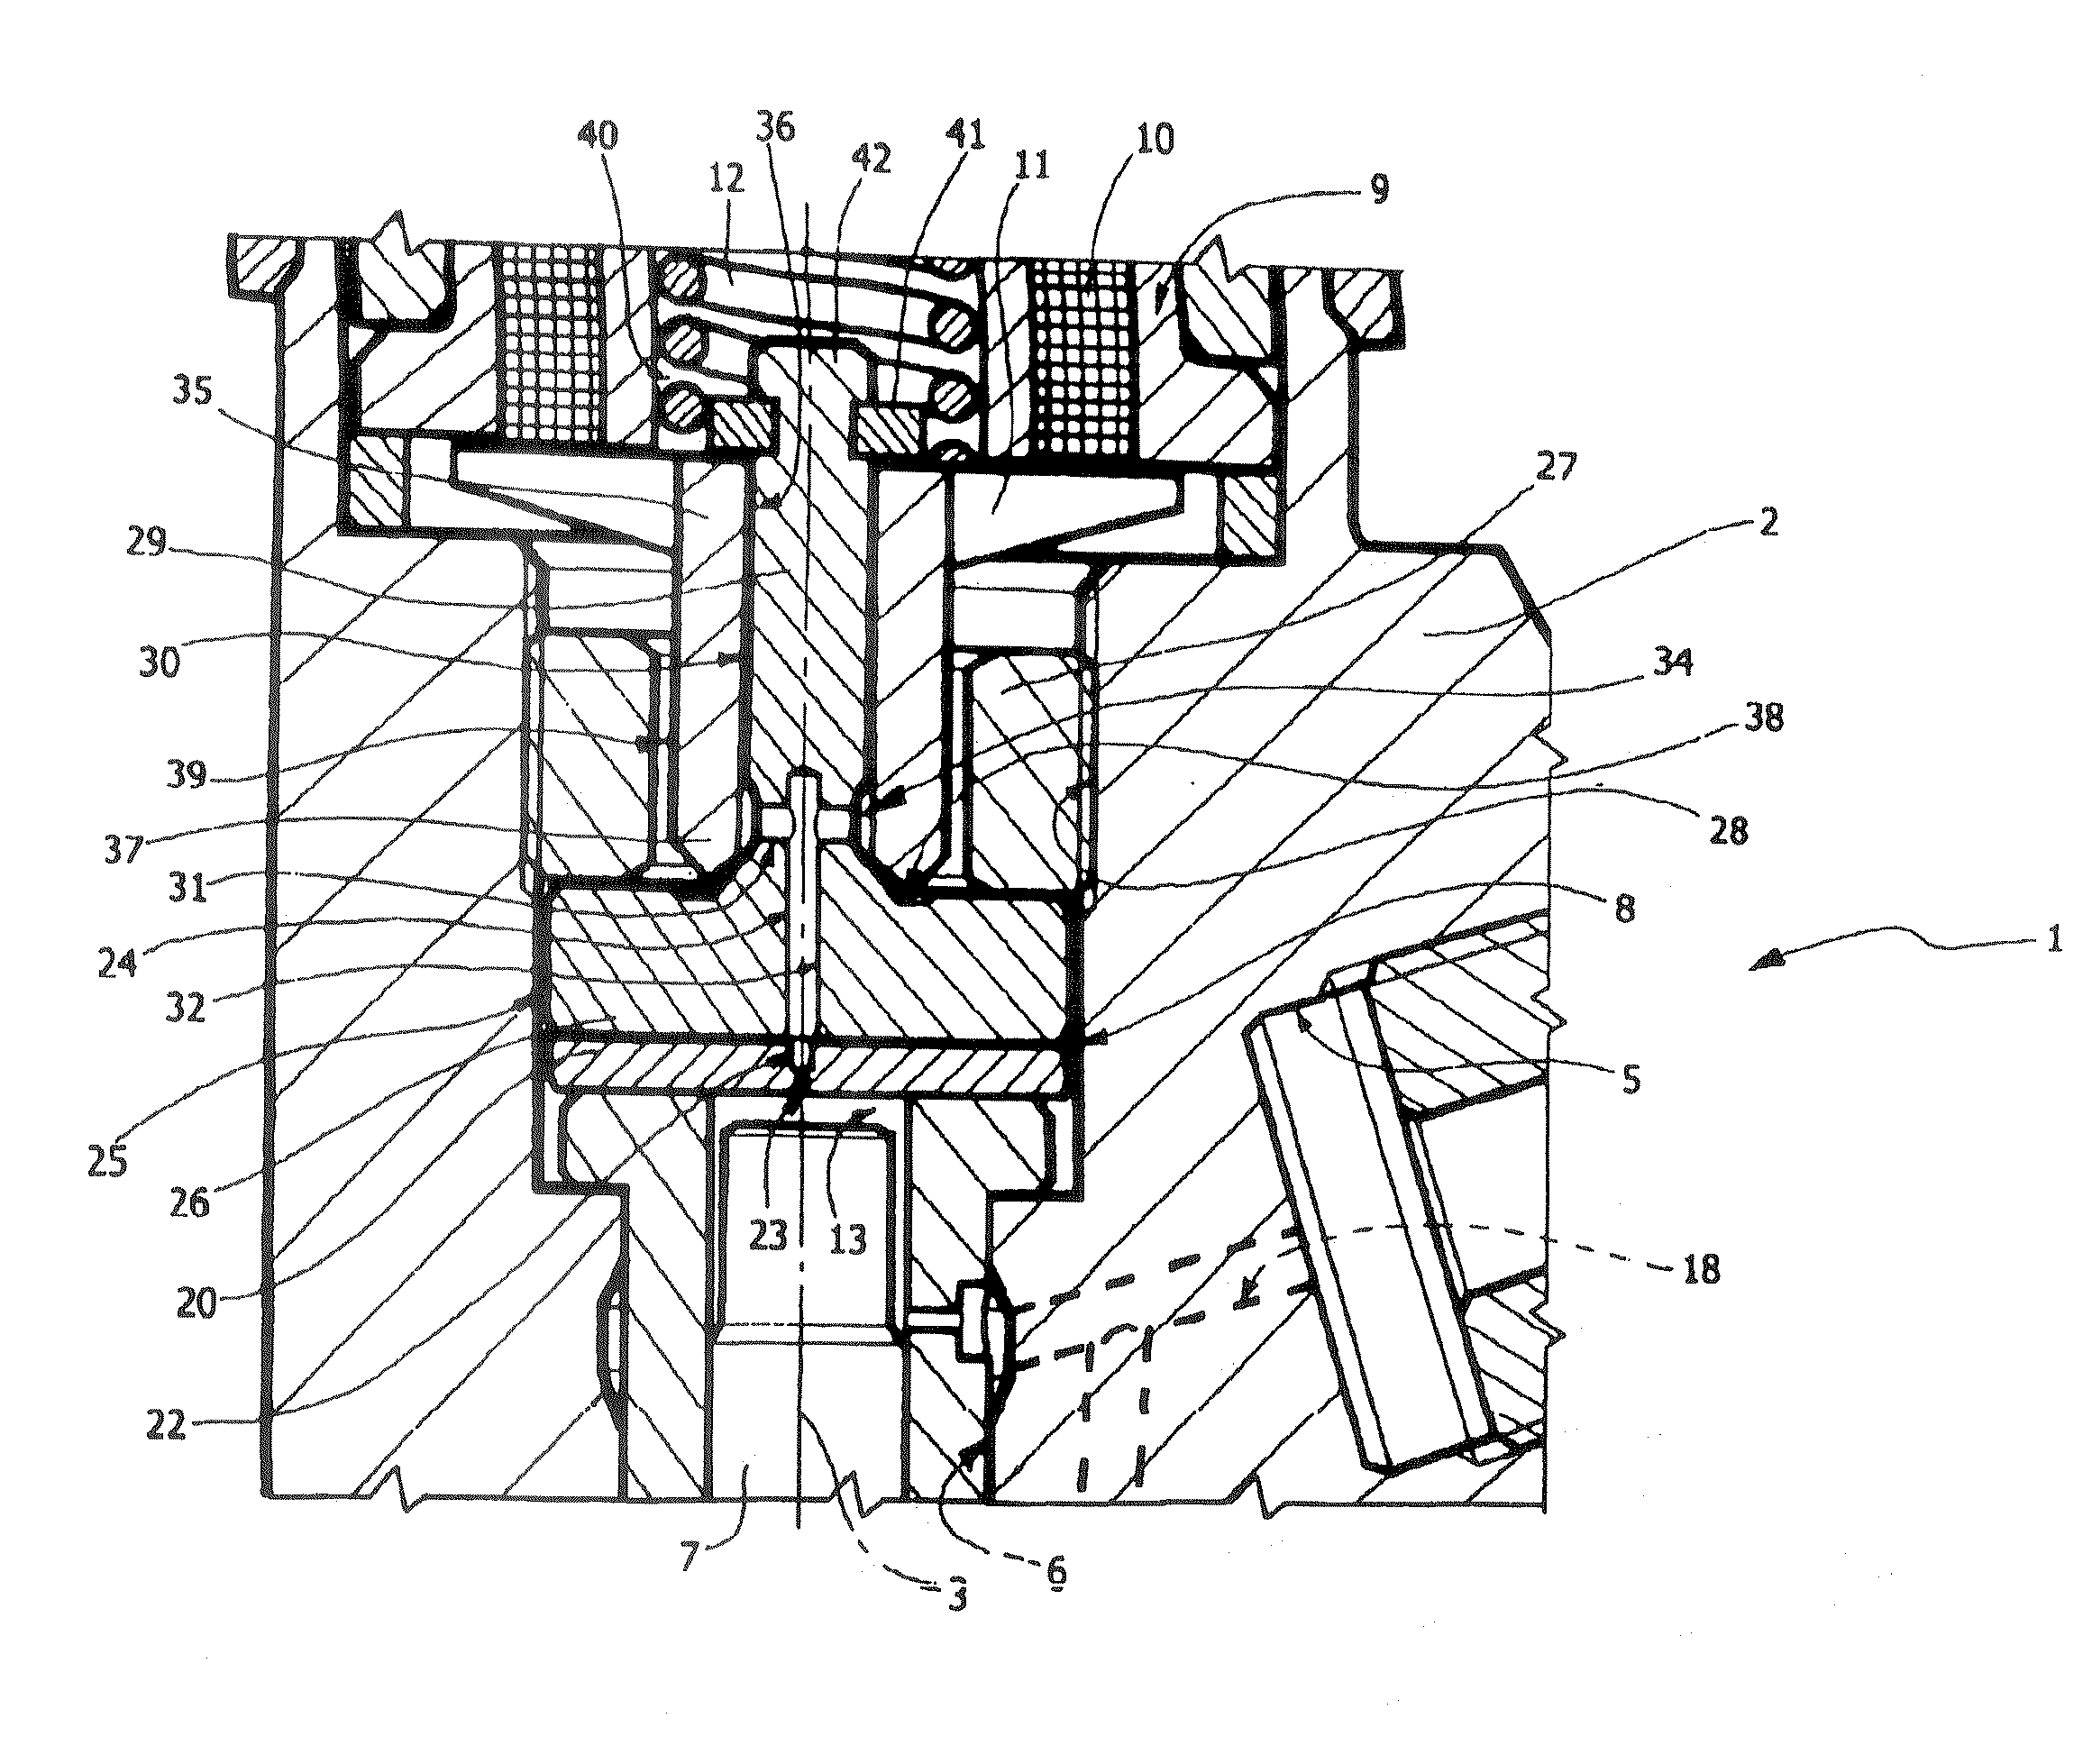 Servo valve for controlling an internal combustion engine injection